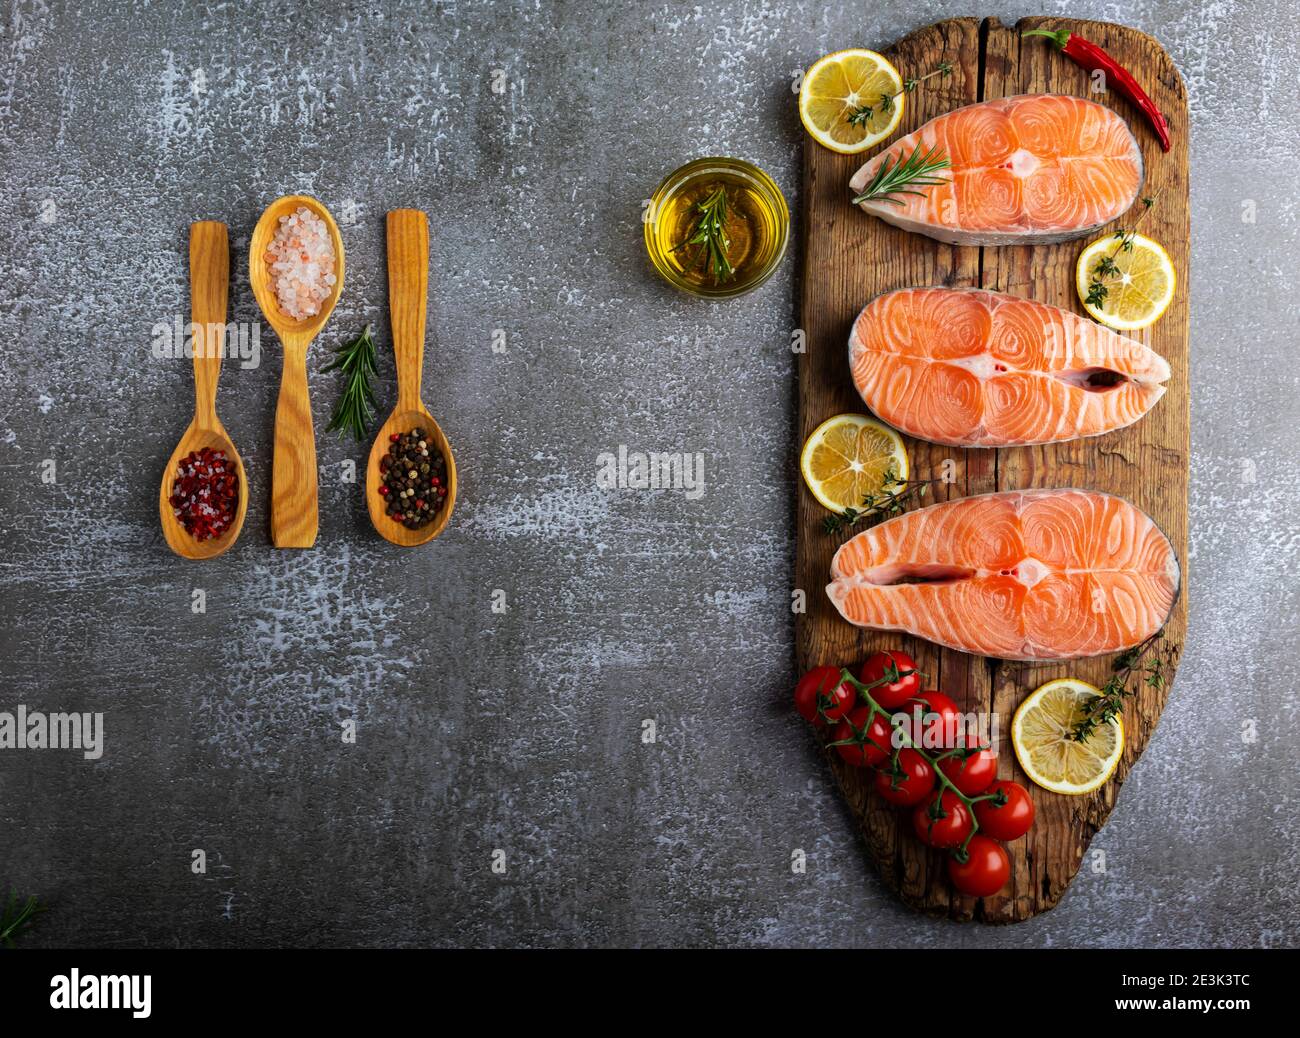 three raw steak fish trout, salmon and spices on wooden board, dark background Stock Photo